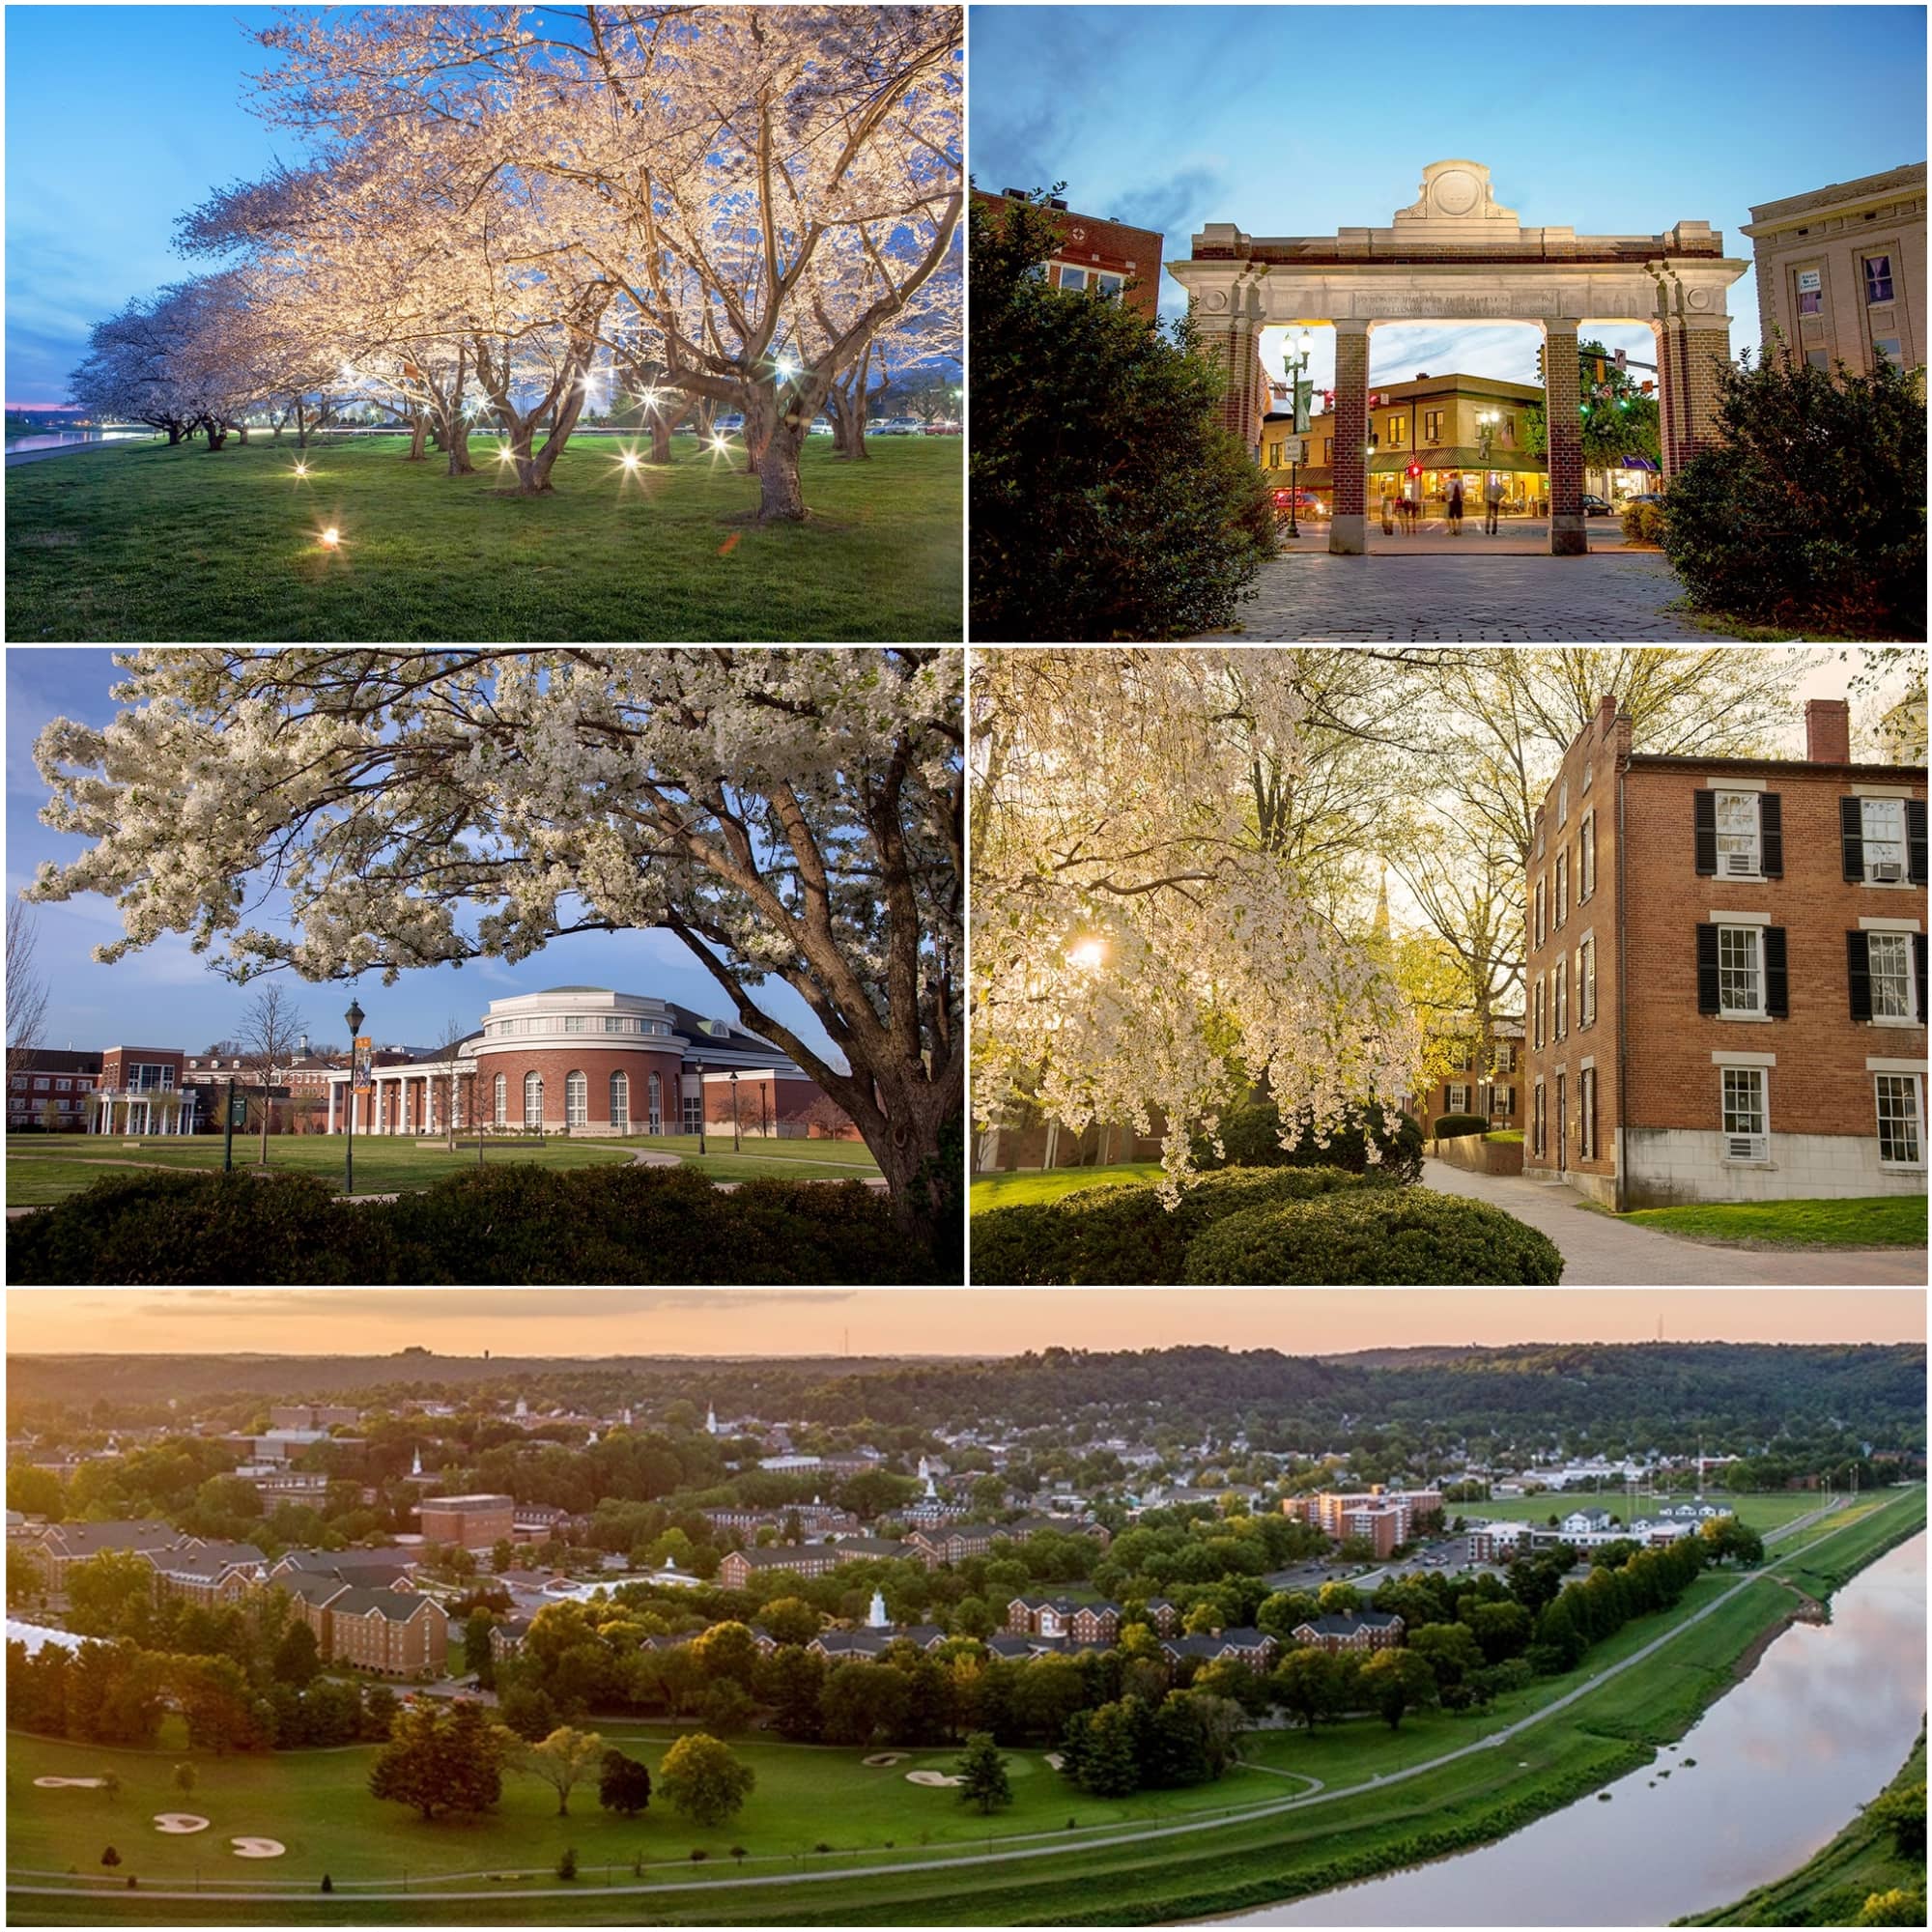 The 15 Most Beautiful College Campuses in the World